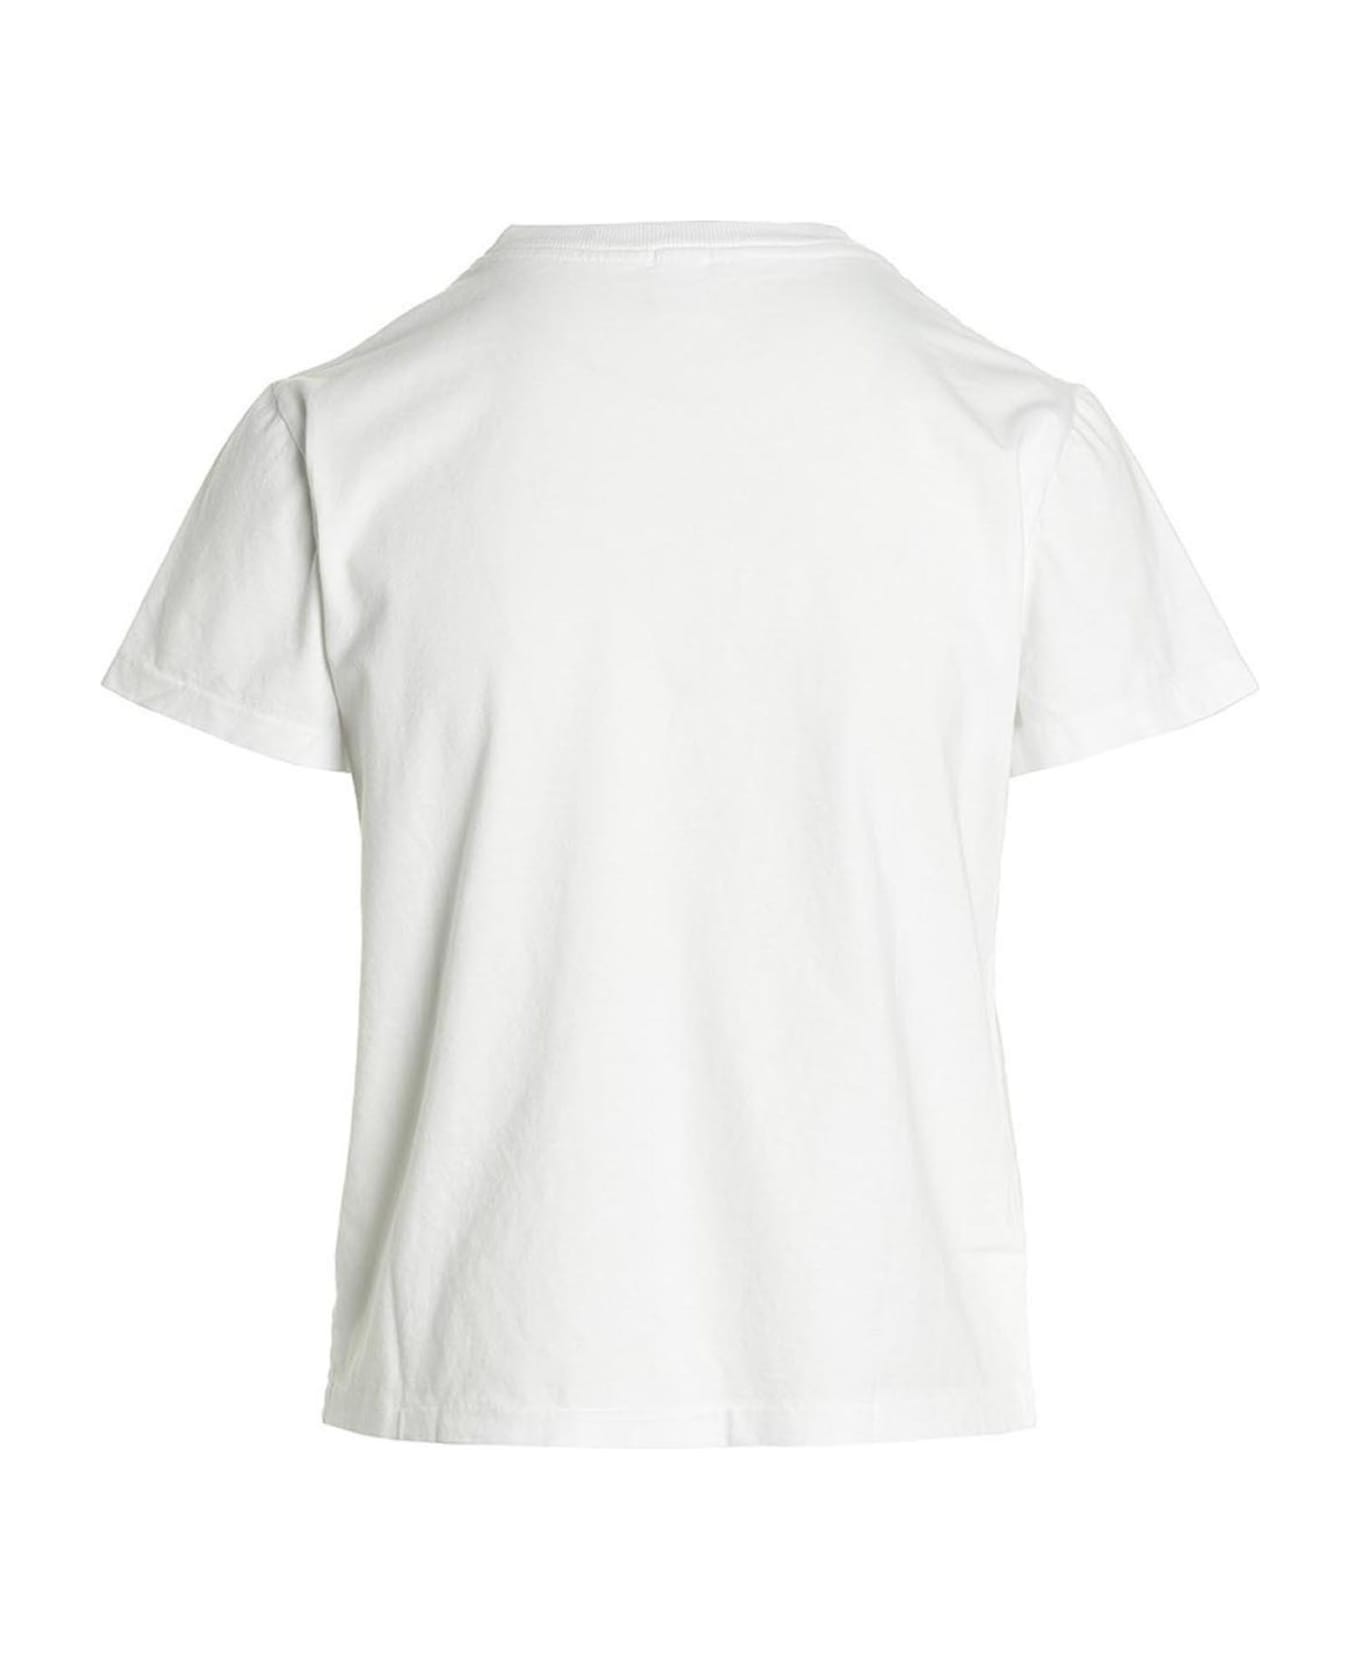 RE/DONE T.shirt 'classic Tee' - White